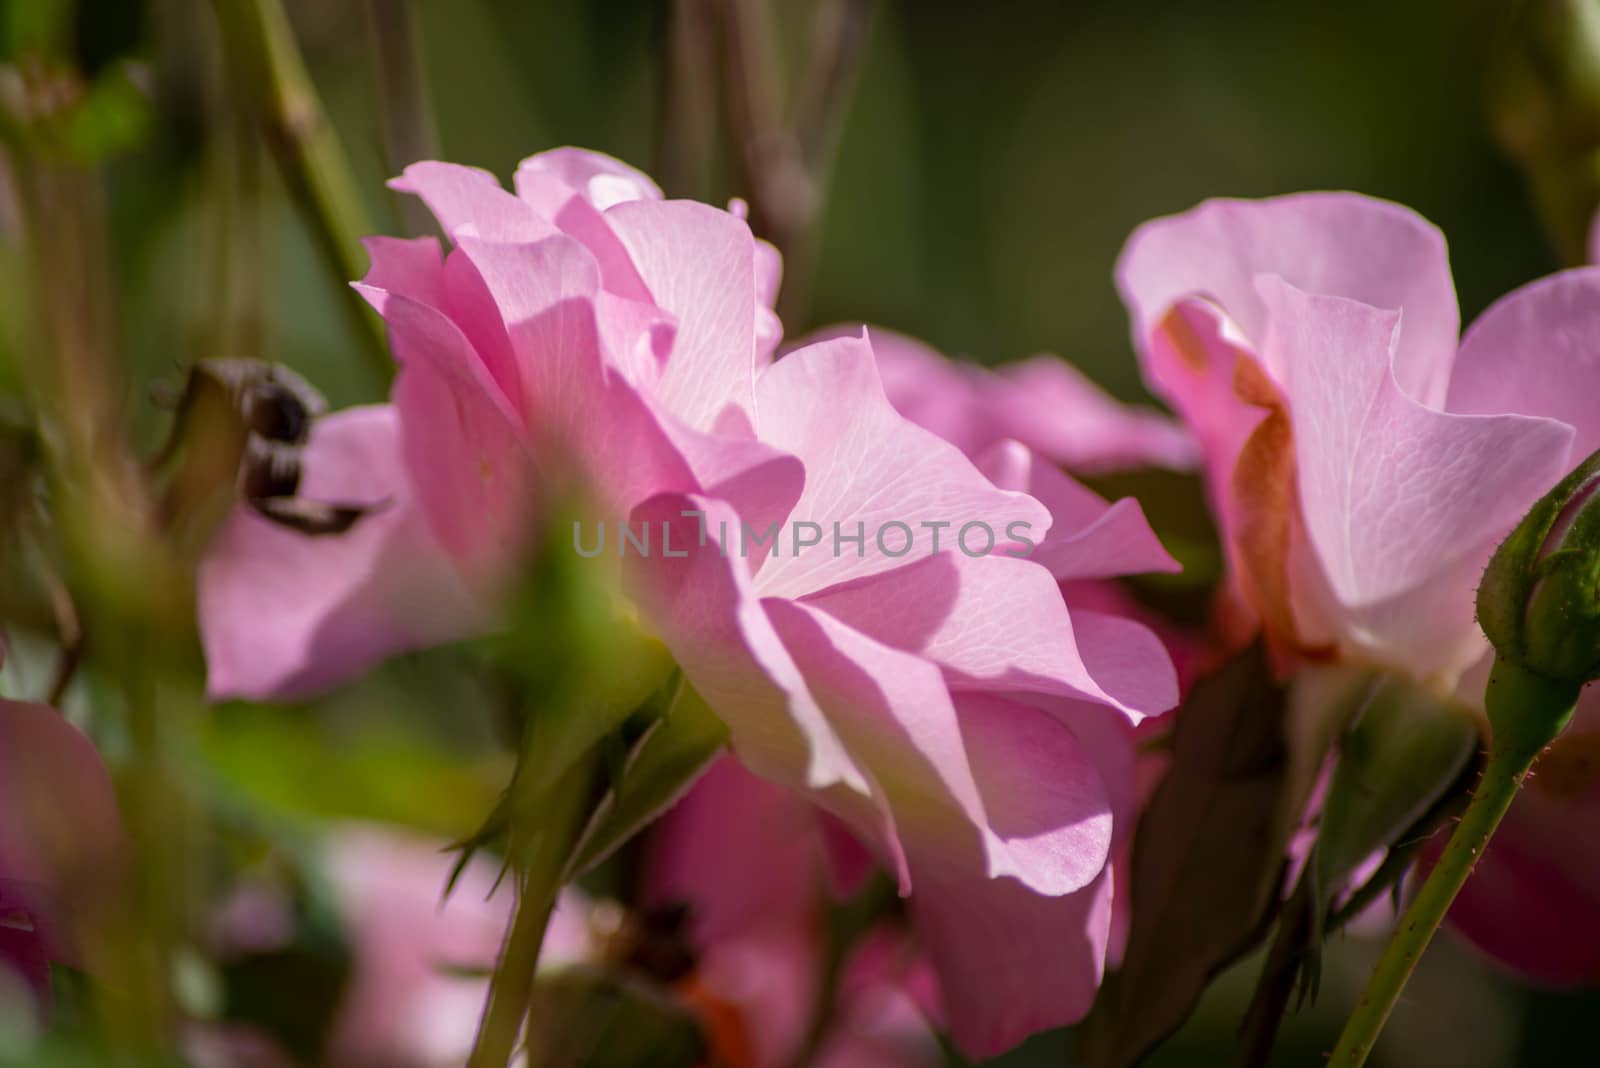 Soft pink petals show lines and veins in abstract full frame image in natural light, selective focus and copy space.